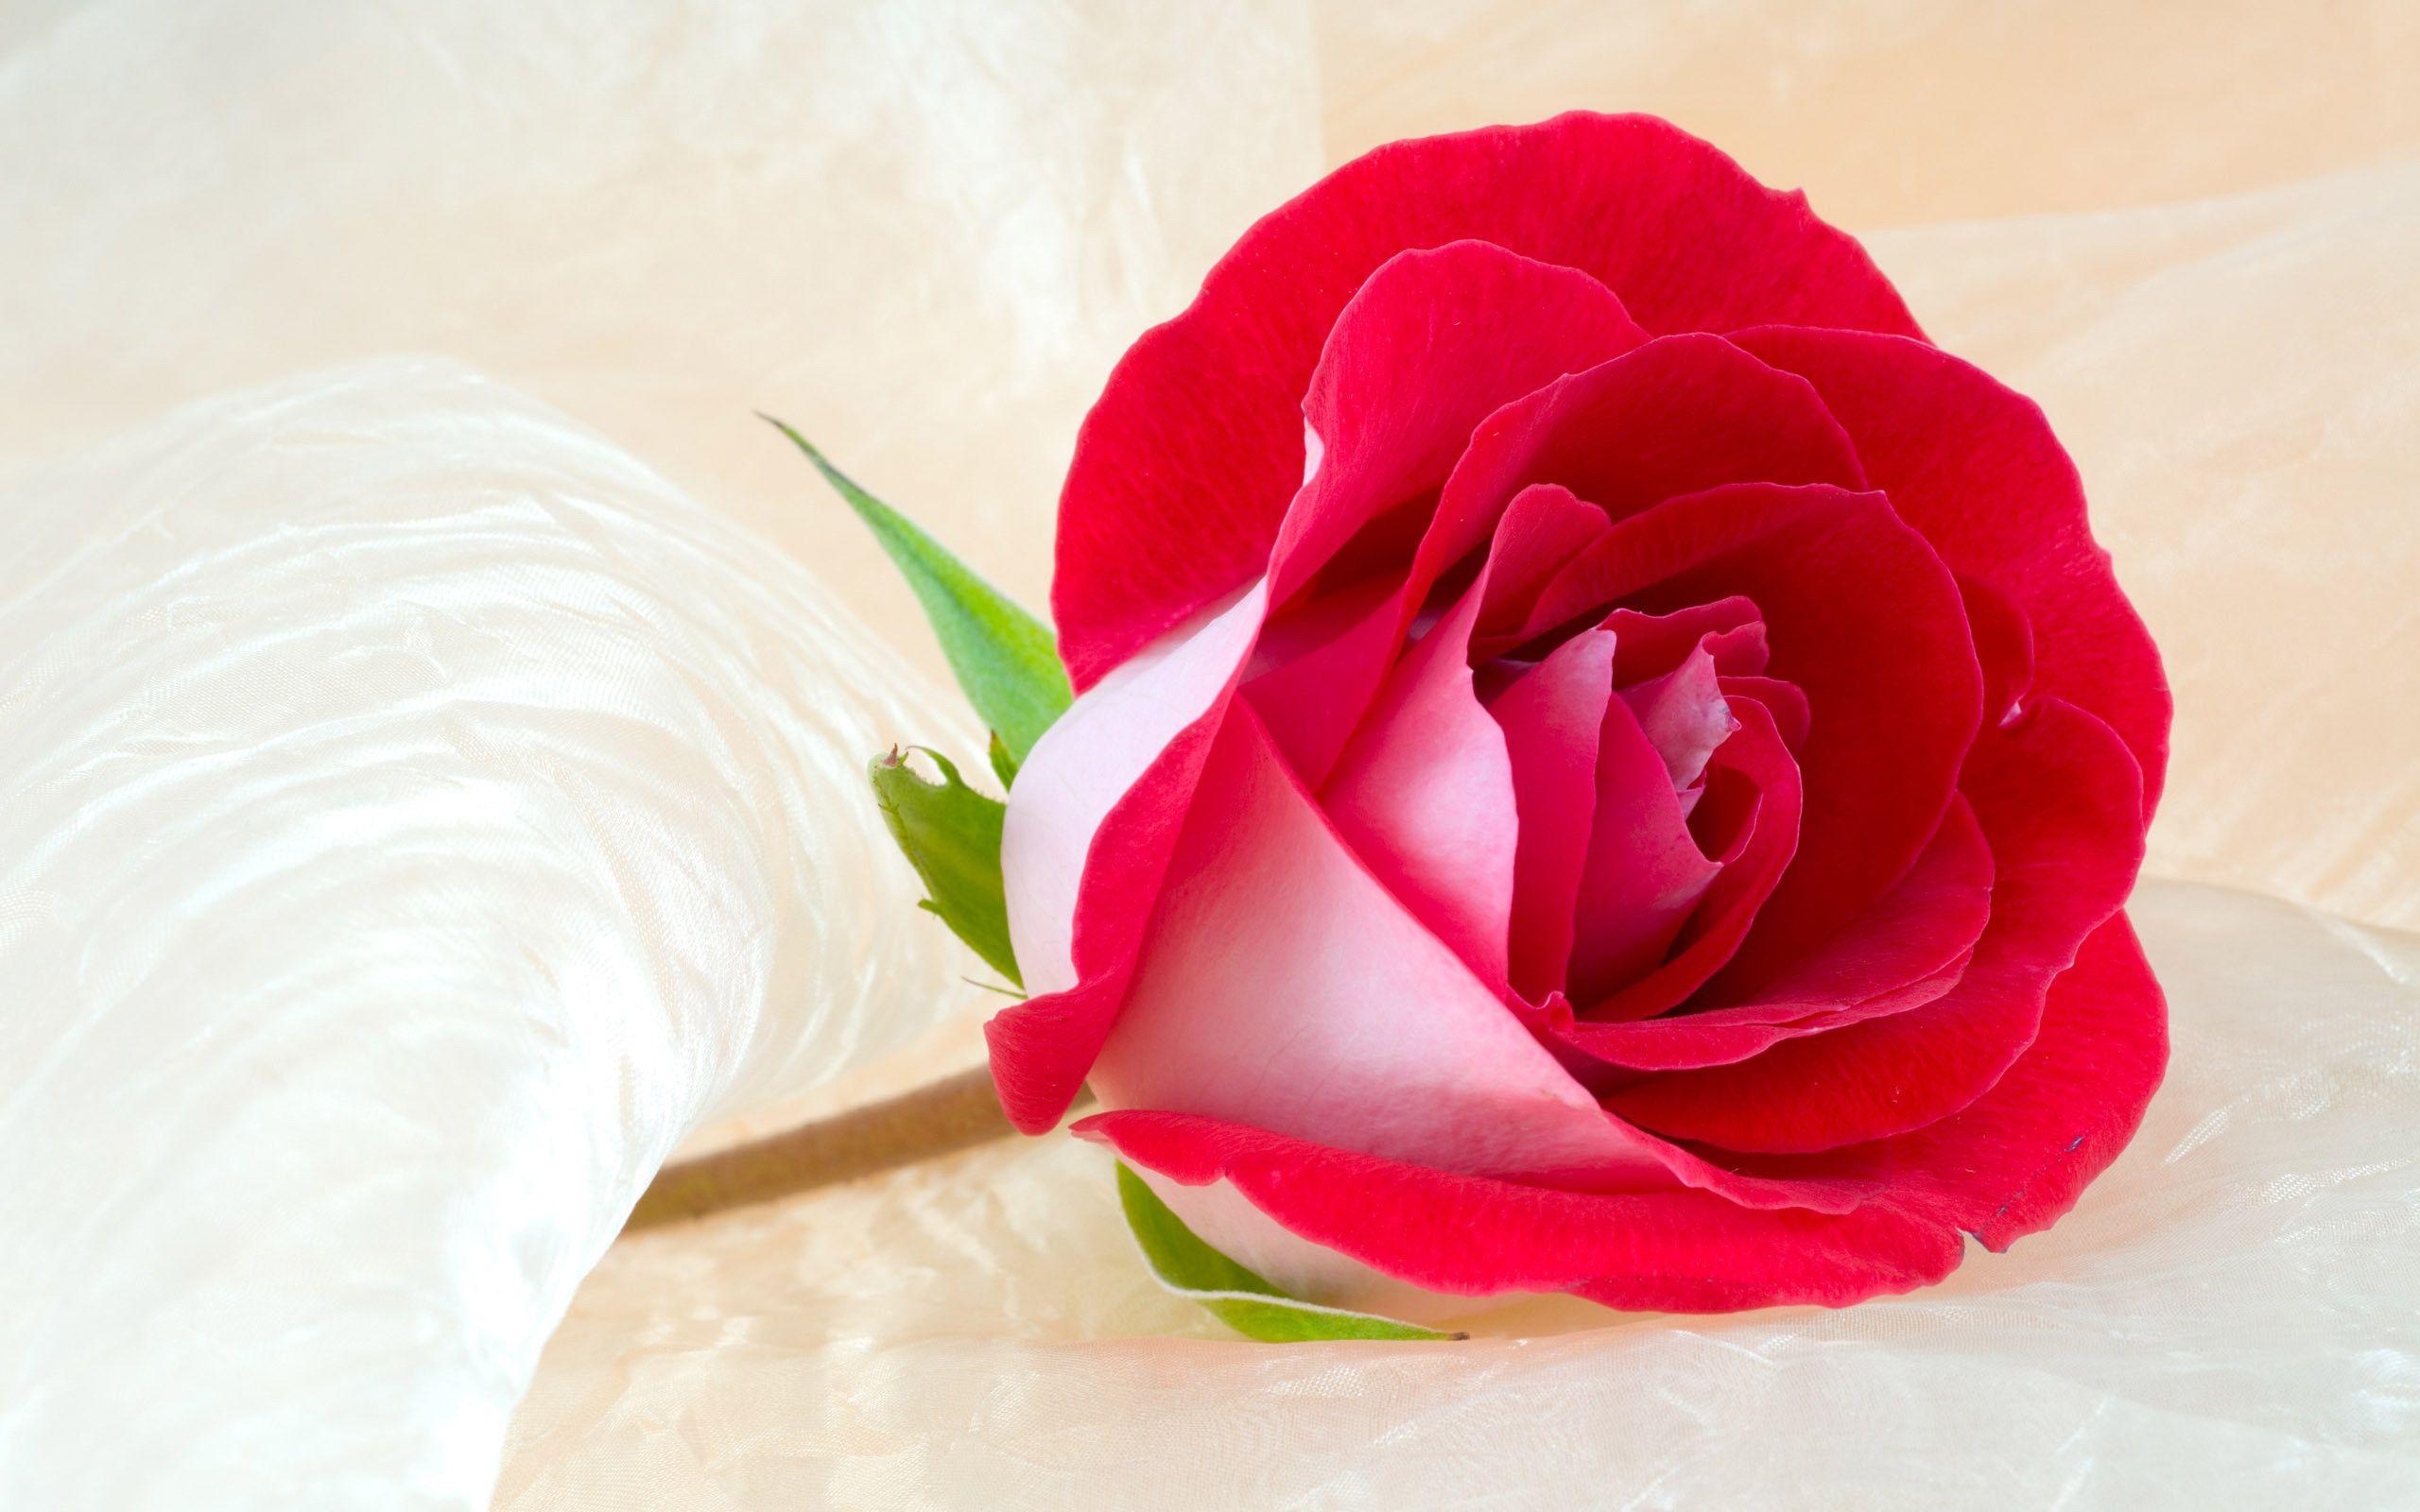 Free Rose Wallpaper Downloads 500 Rose Wallpapers for FREE  Wallpapers com